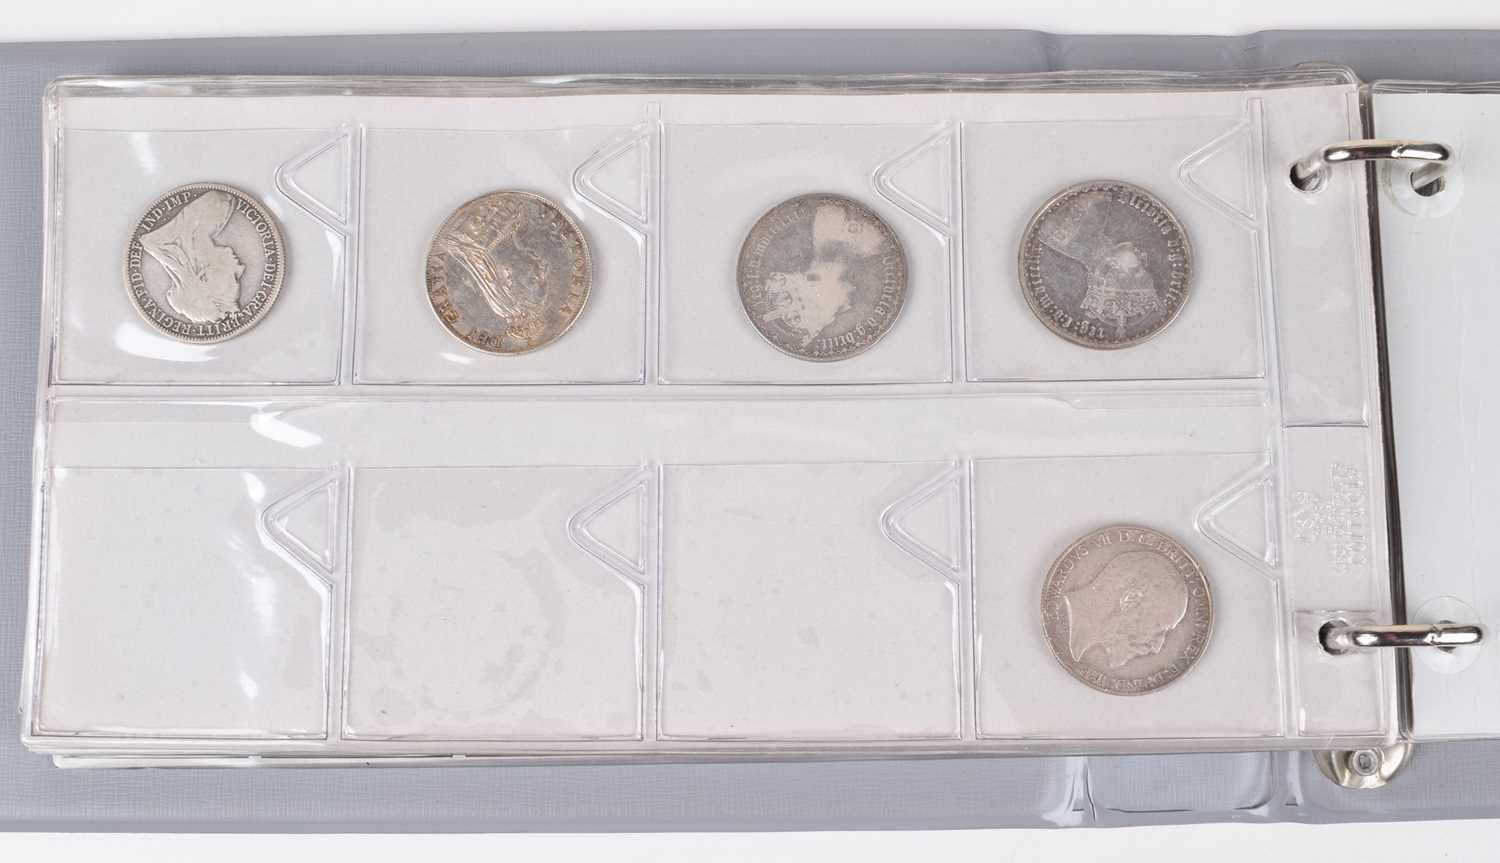 Lot 24 - Red album of various lower denomination historical British coinage.